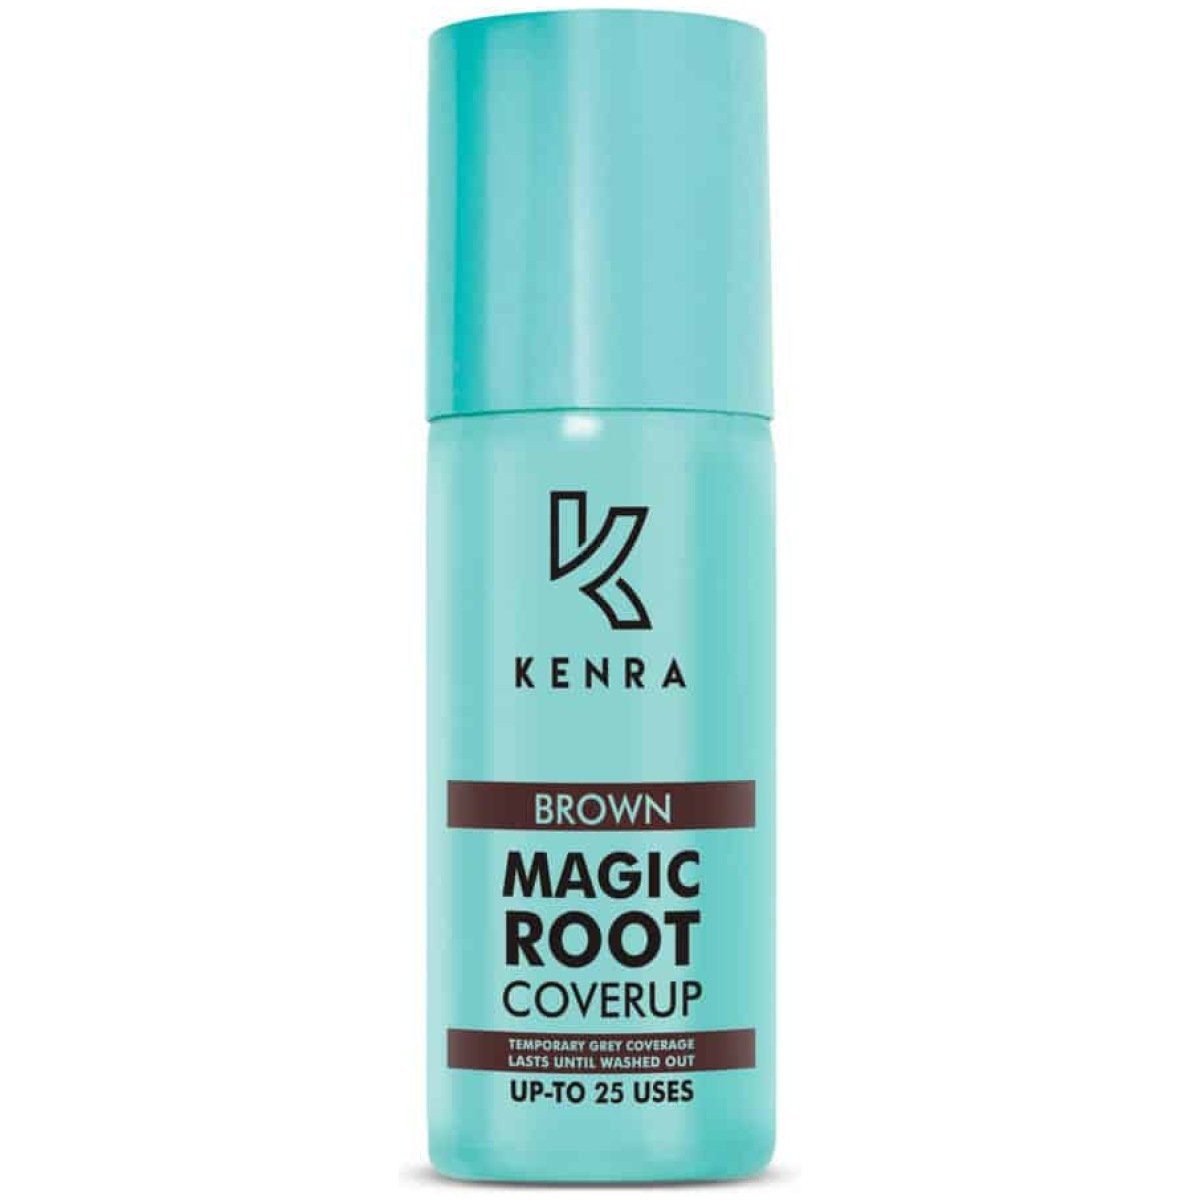 Kenra Magic Retouch Temporary Root Touch Up Hair Colour Spray 75ml Brown